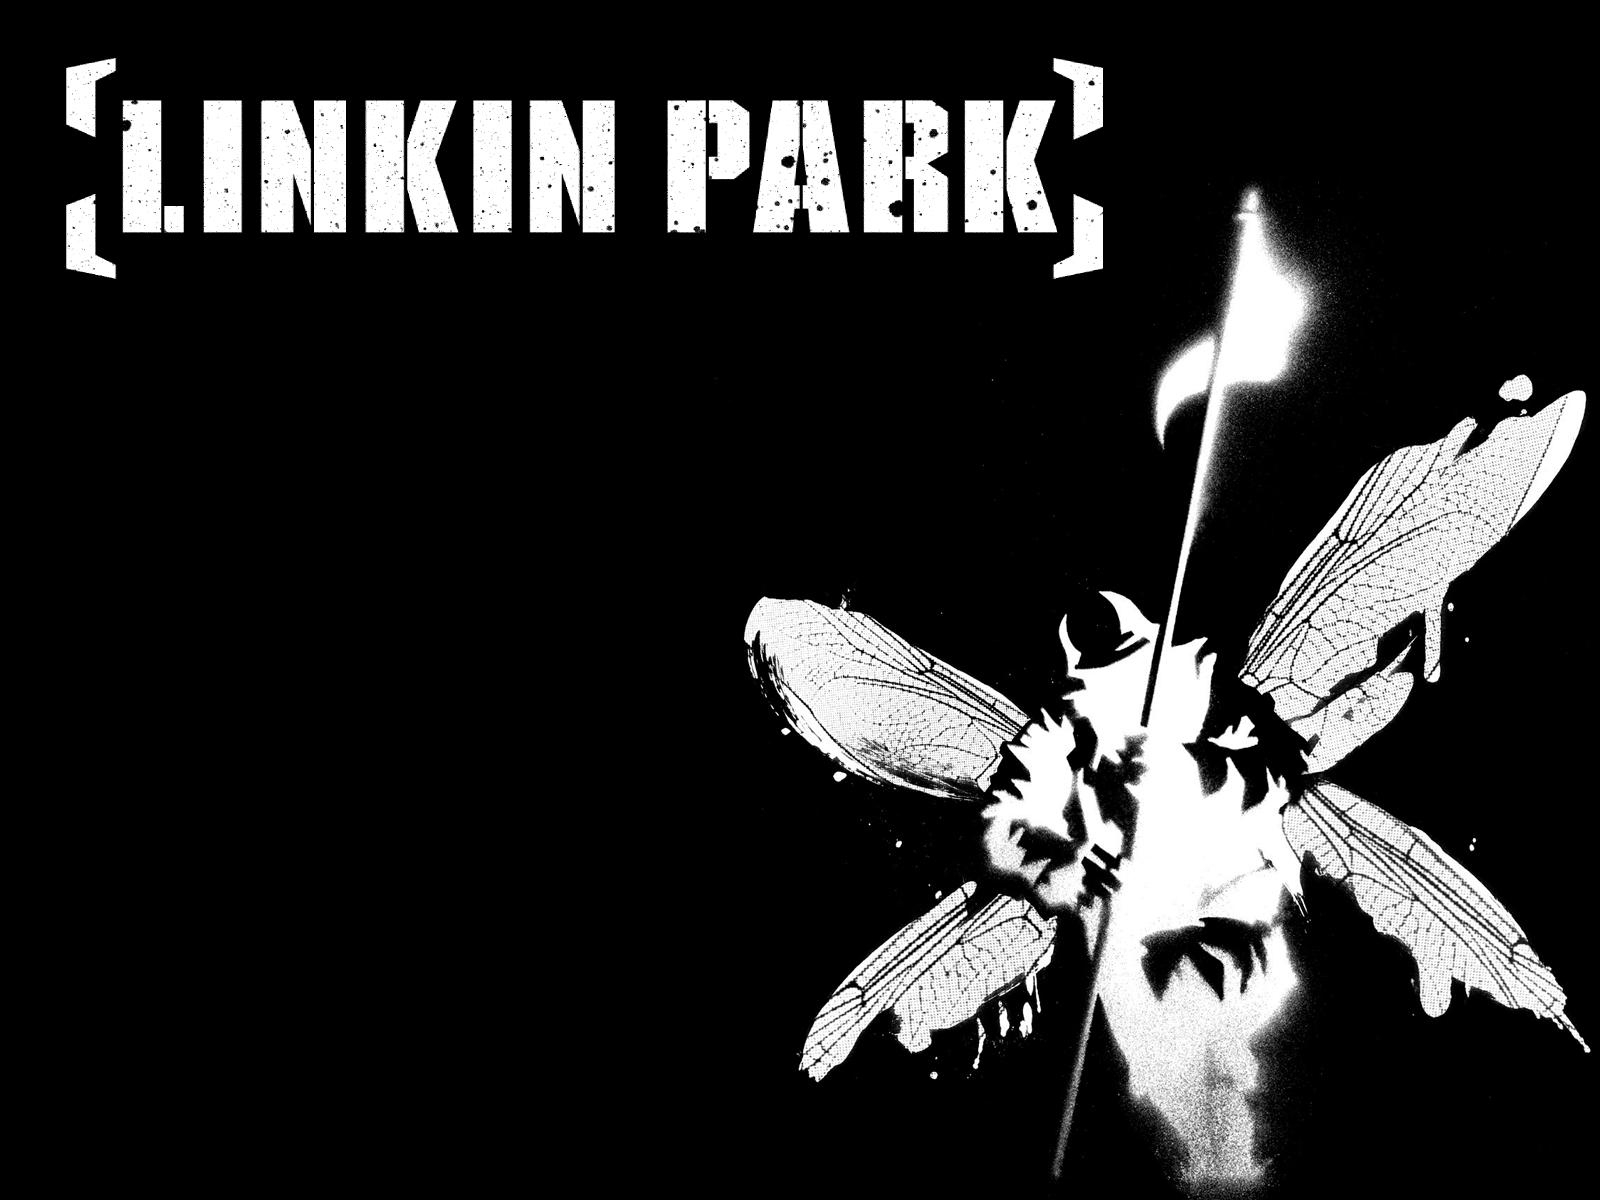 linkin park wallpaper hd,black and white,font,monochrome photography,graphic design,wing